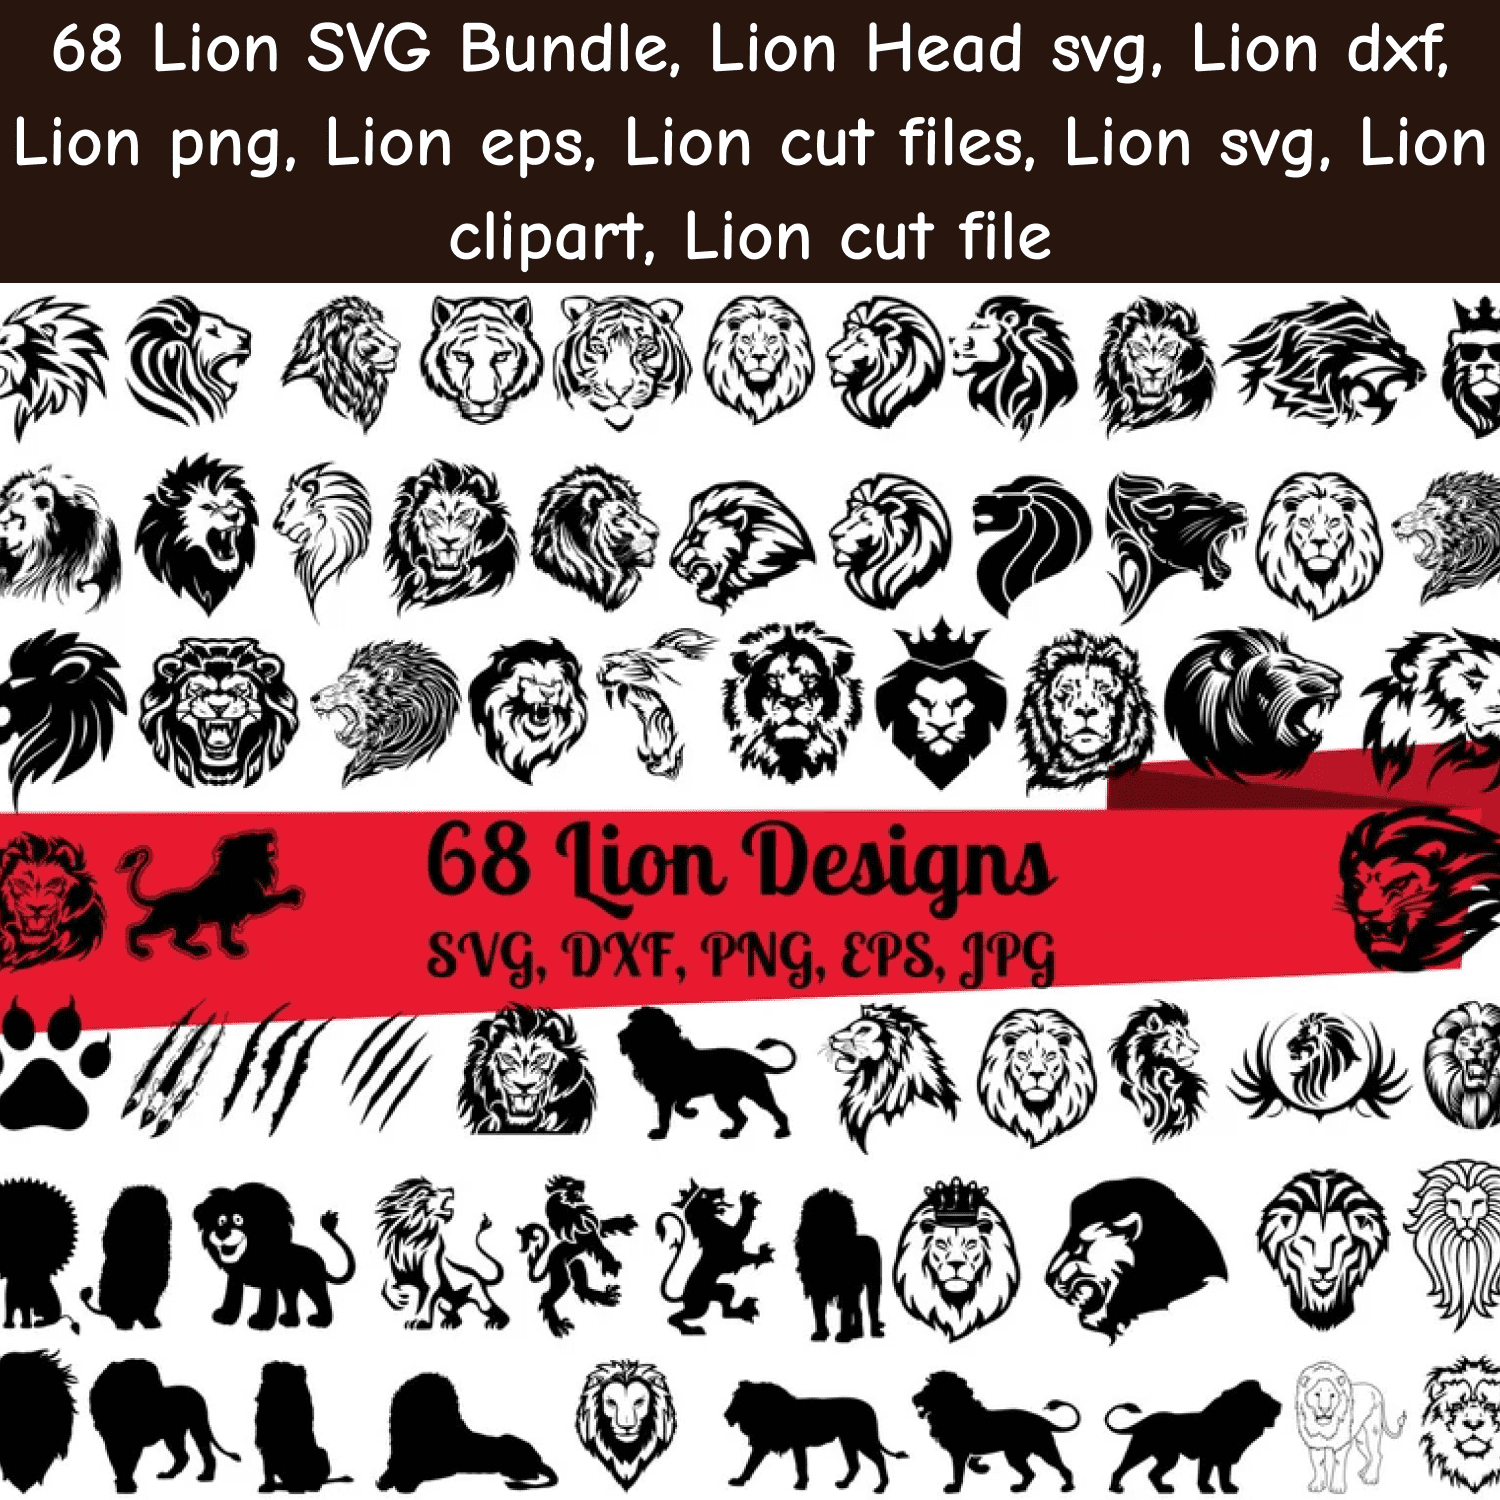 Large collection of lion clipart designs.